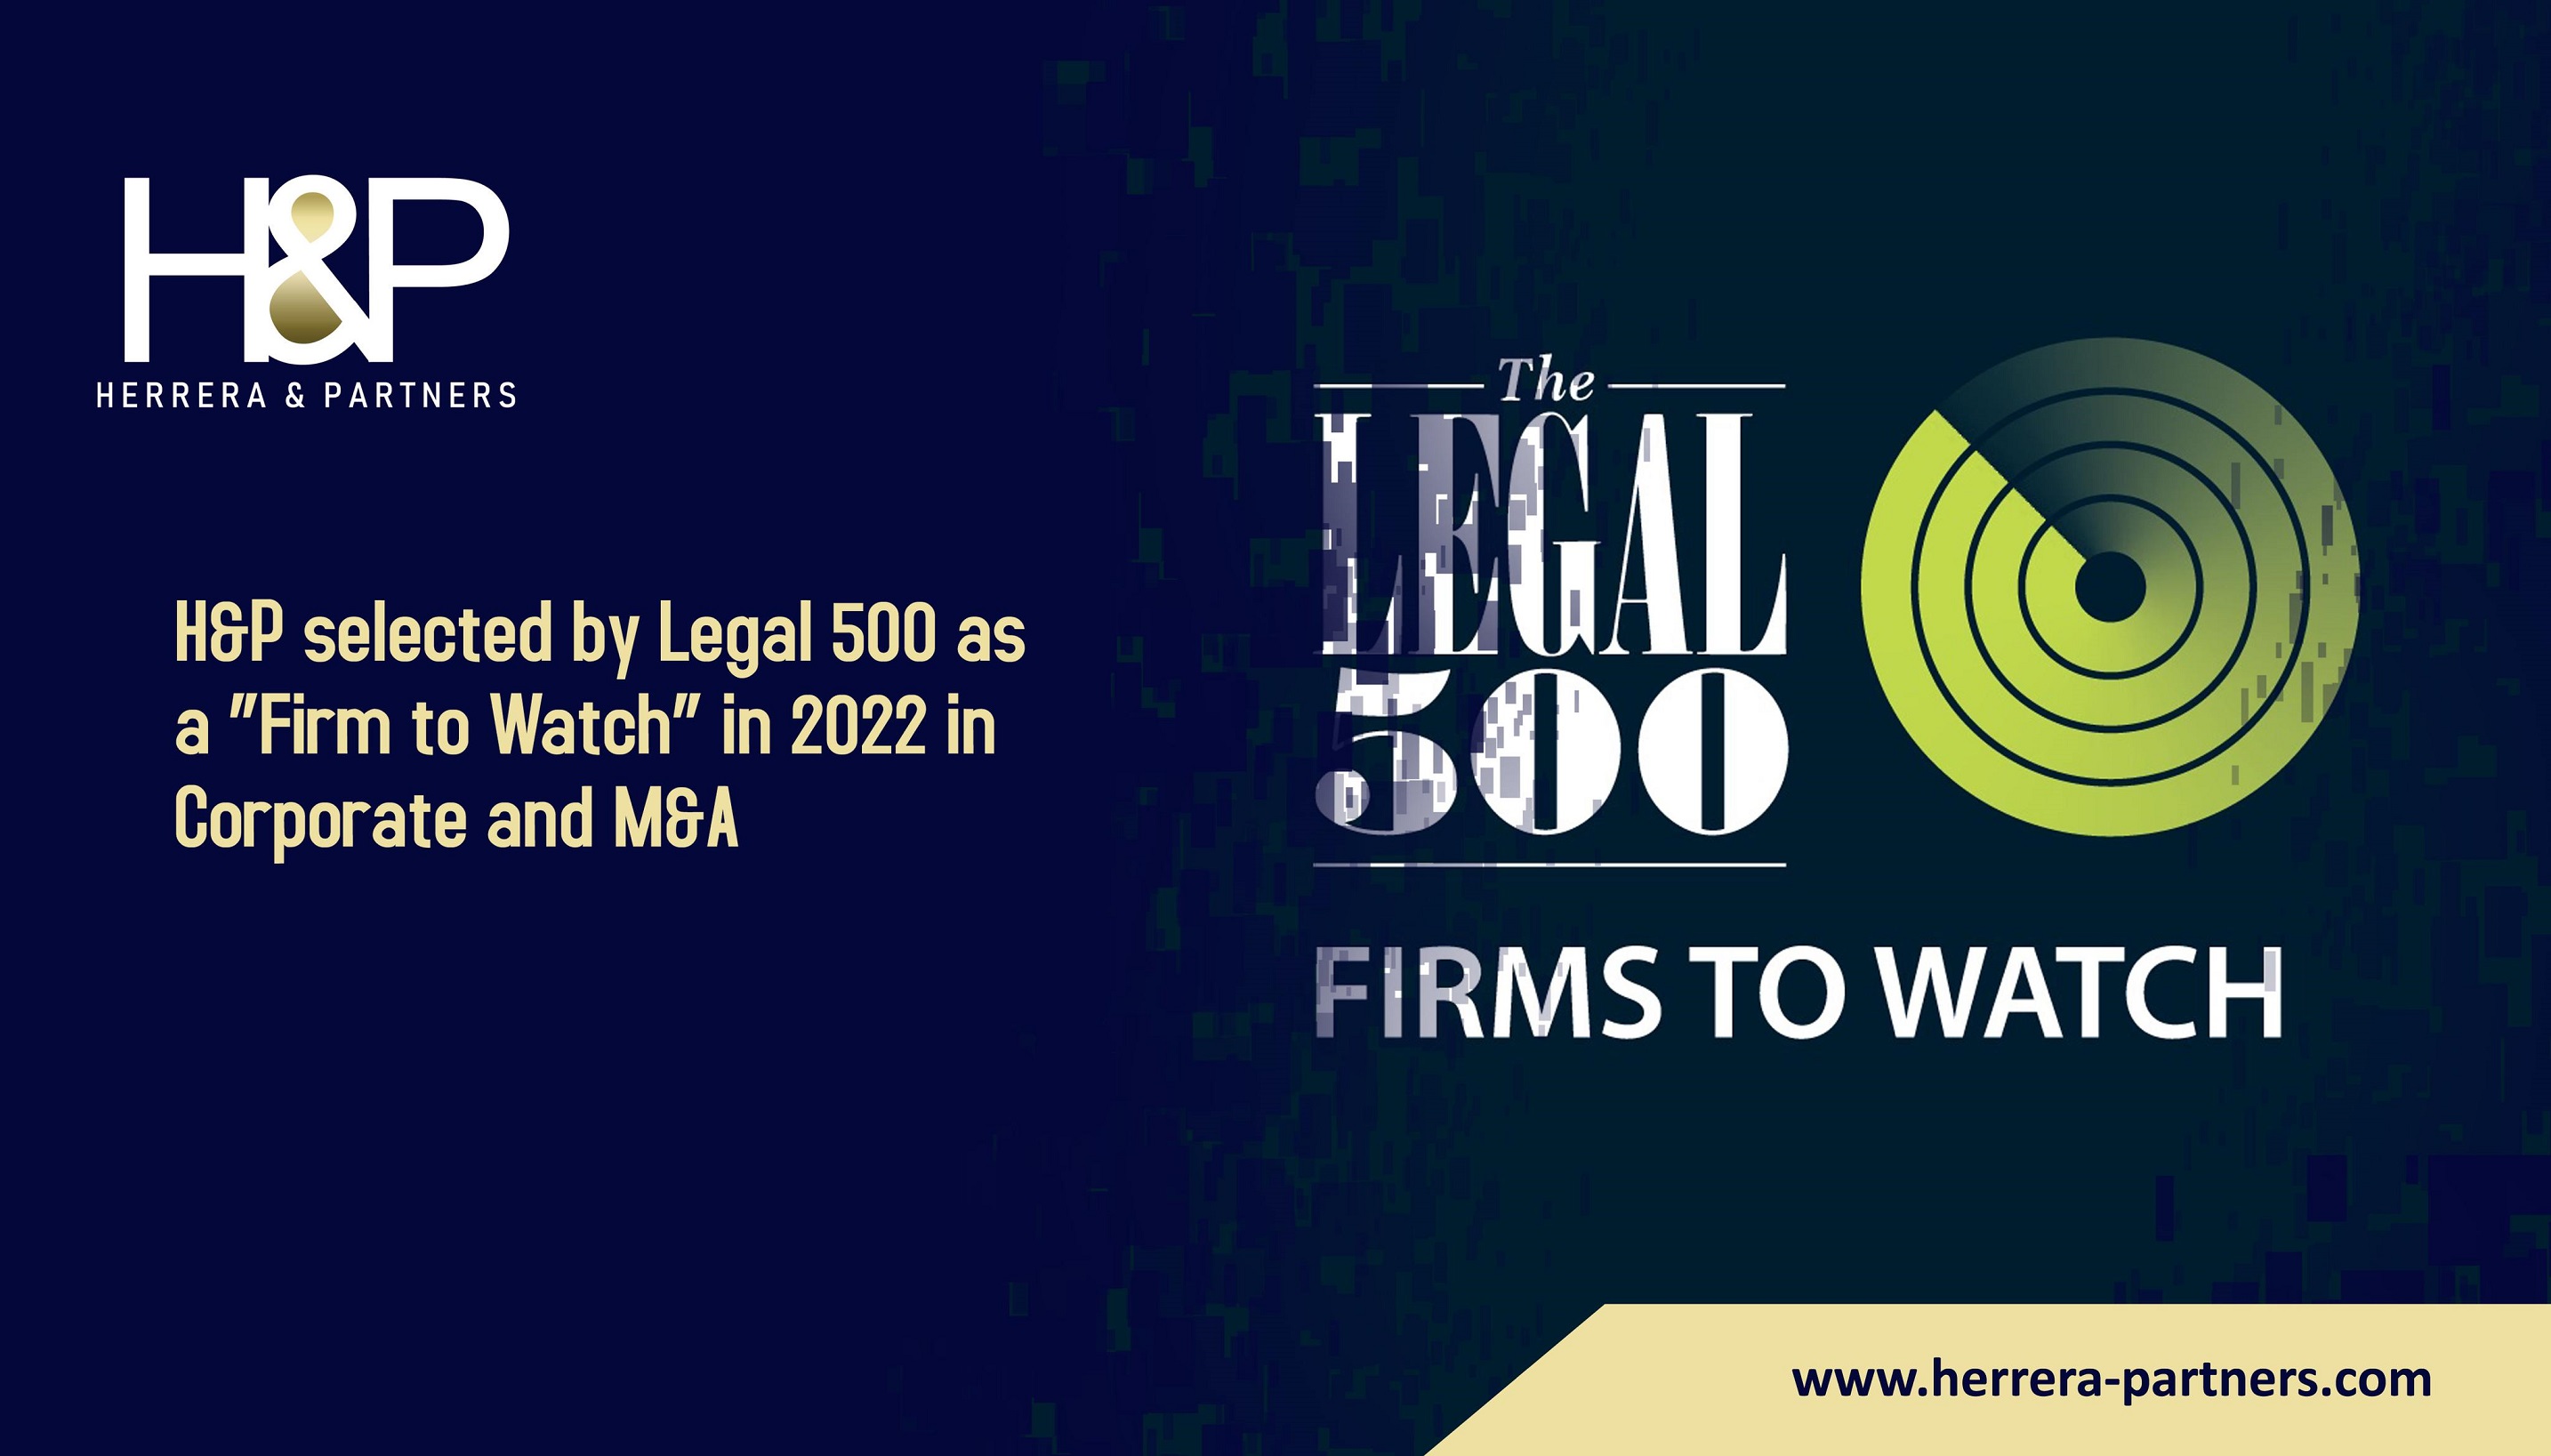 H&P selected by Legal 500 as a “Firm to Watch” in 2022 in Corporate and M&A